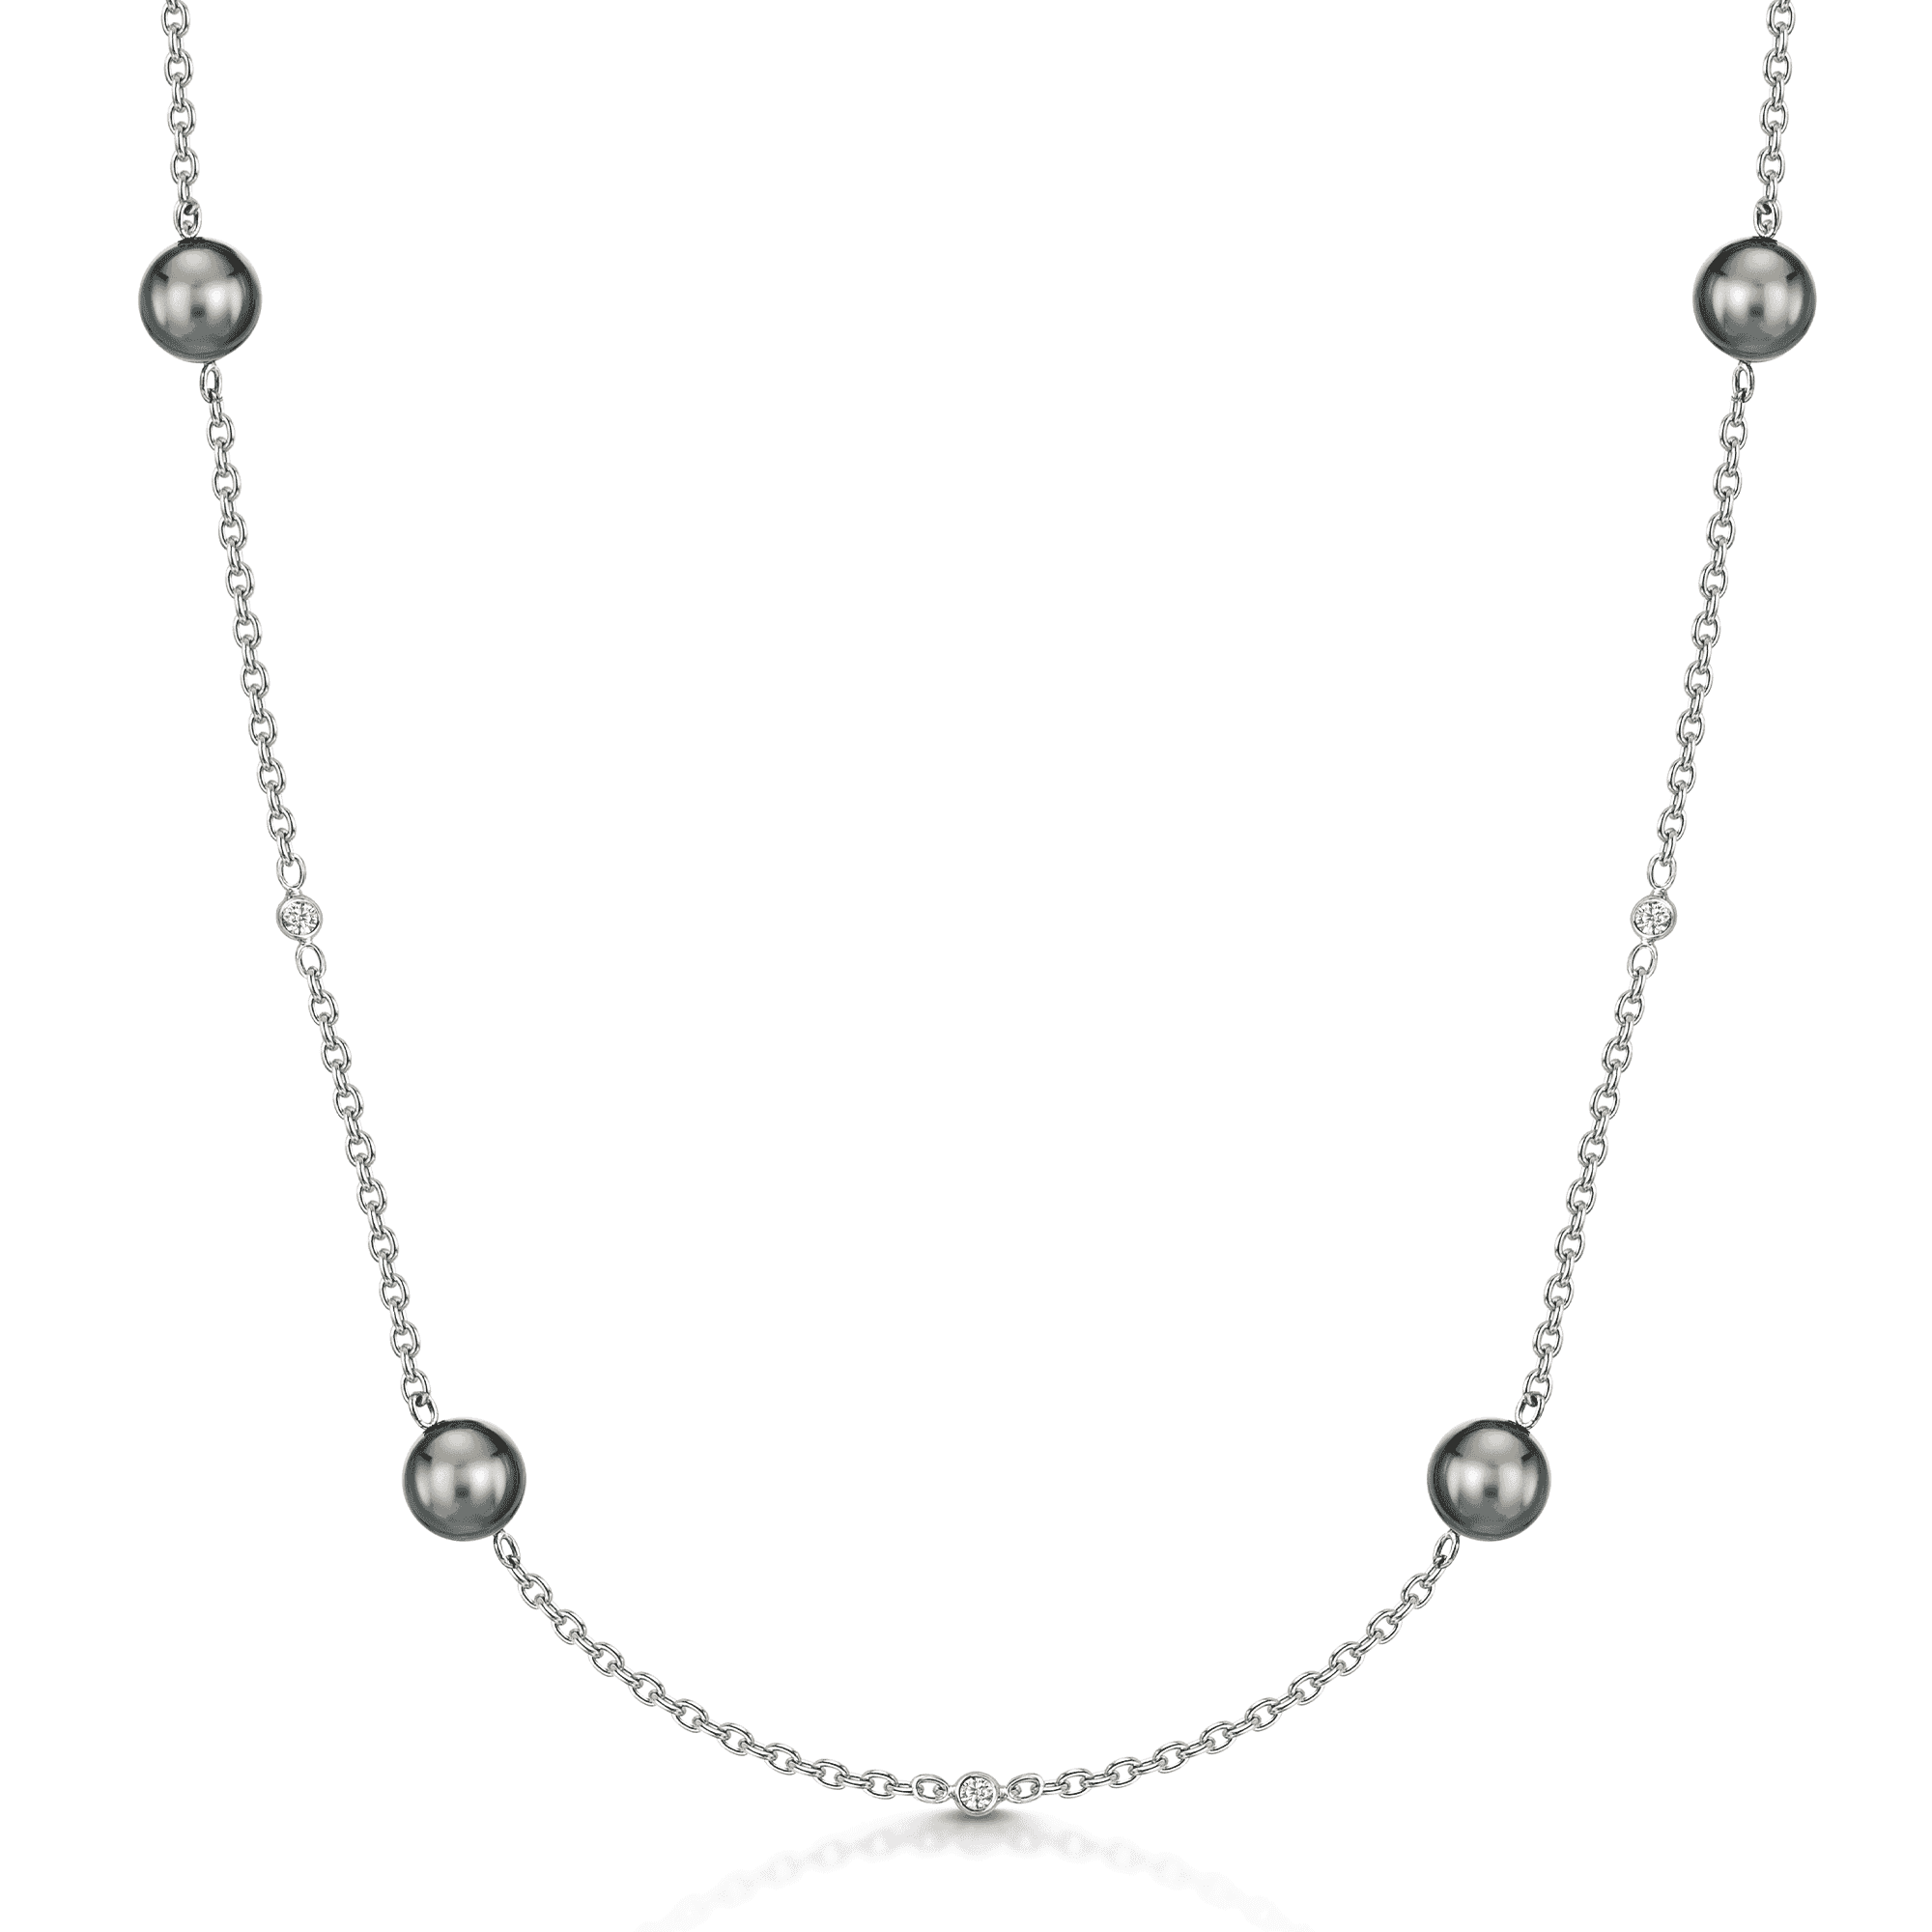 18ct White Gold Black South Sea Pearl & Diamond Long Chain Necklace